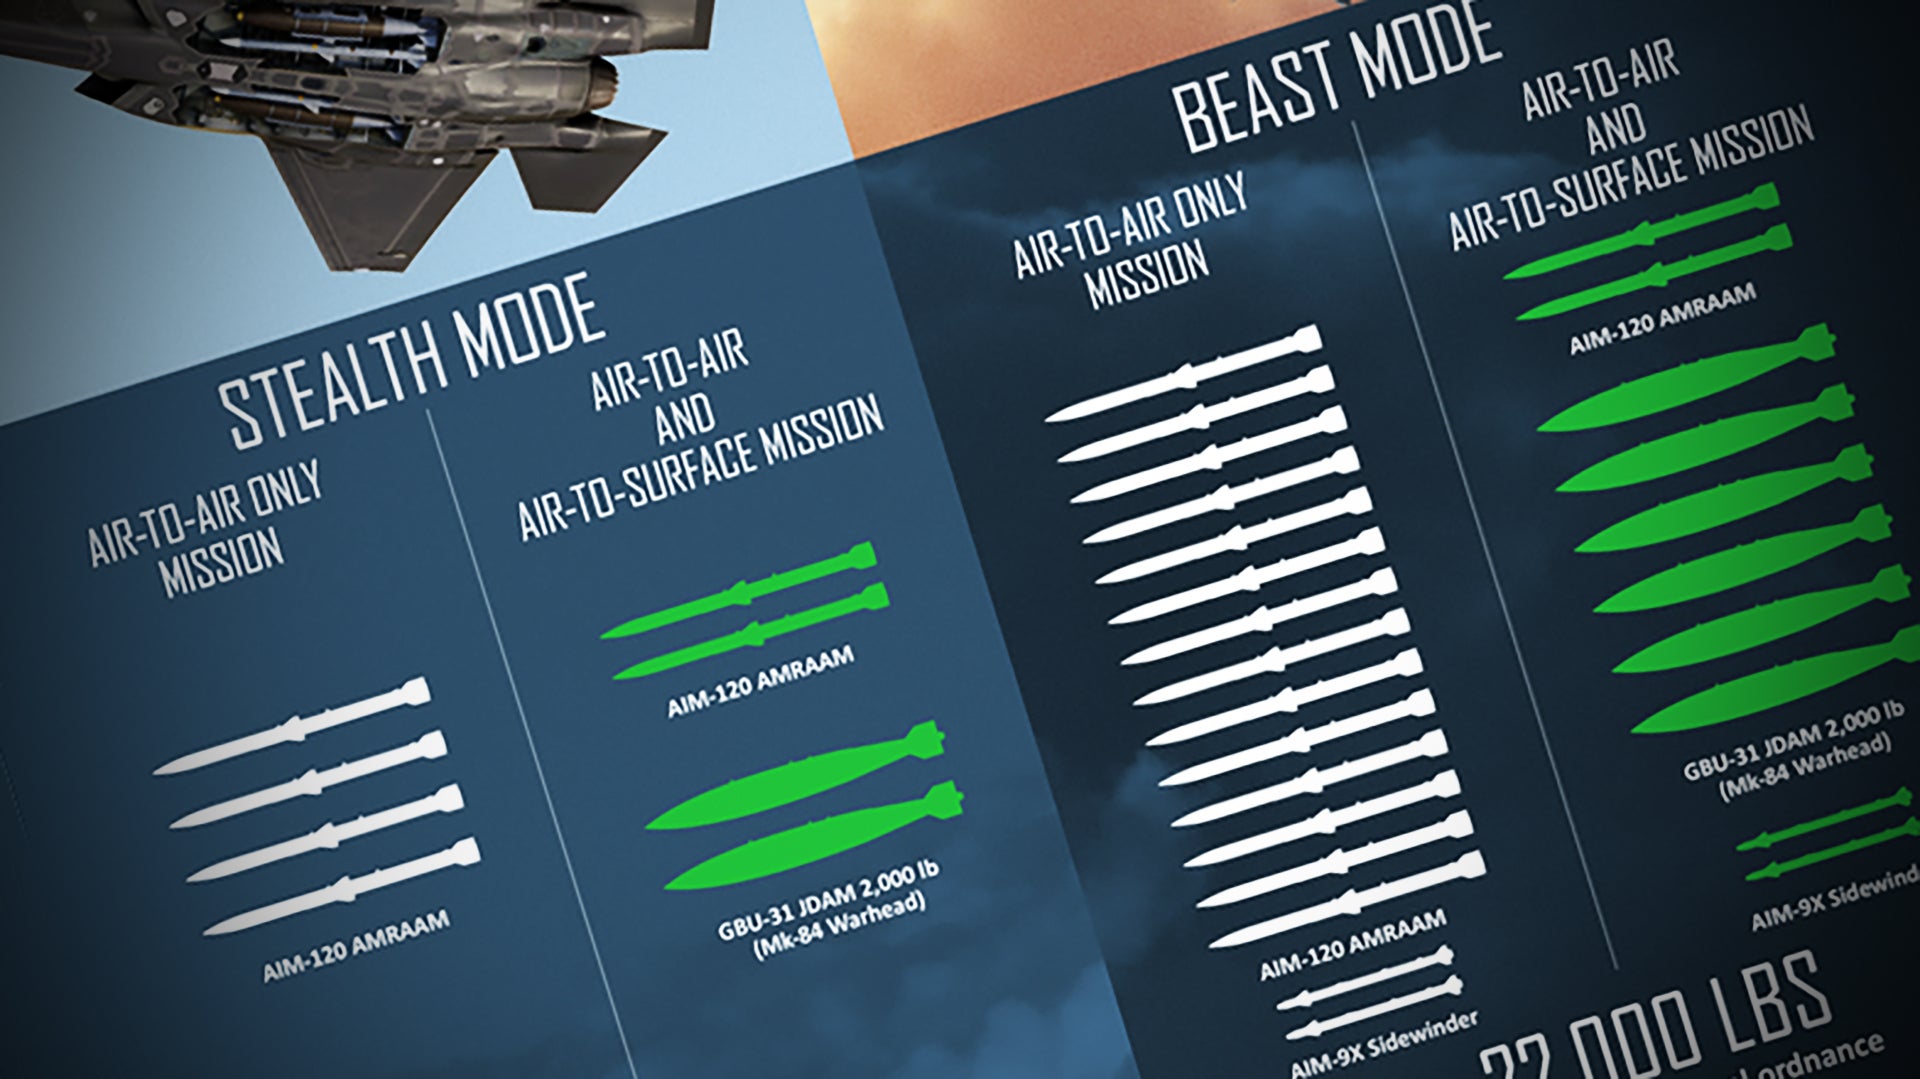 Lockheed Touts Non-Existent “Beast Mode” F-35 Configuration With 16 Air-To-Air Missiles